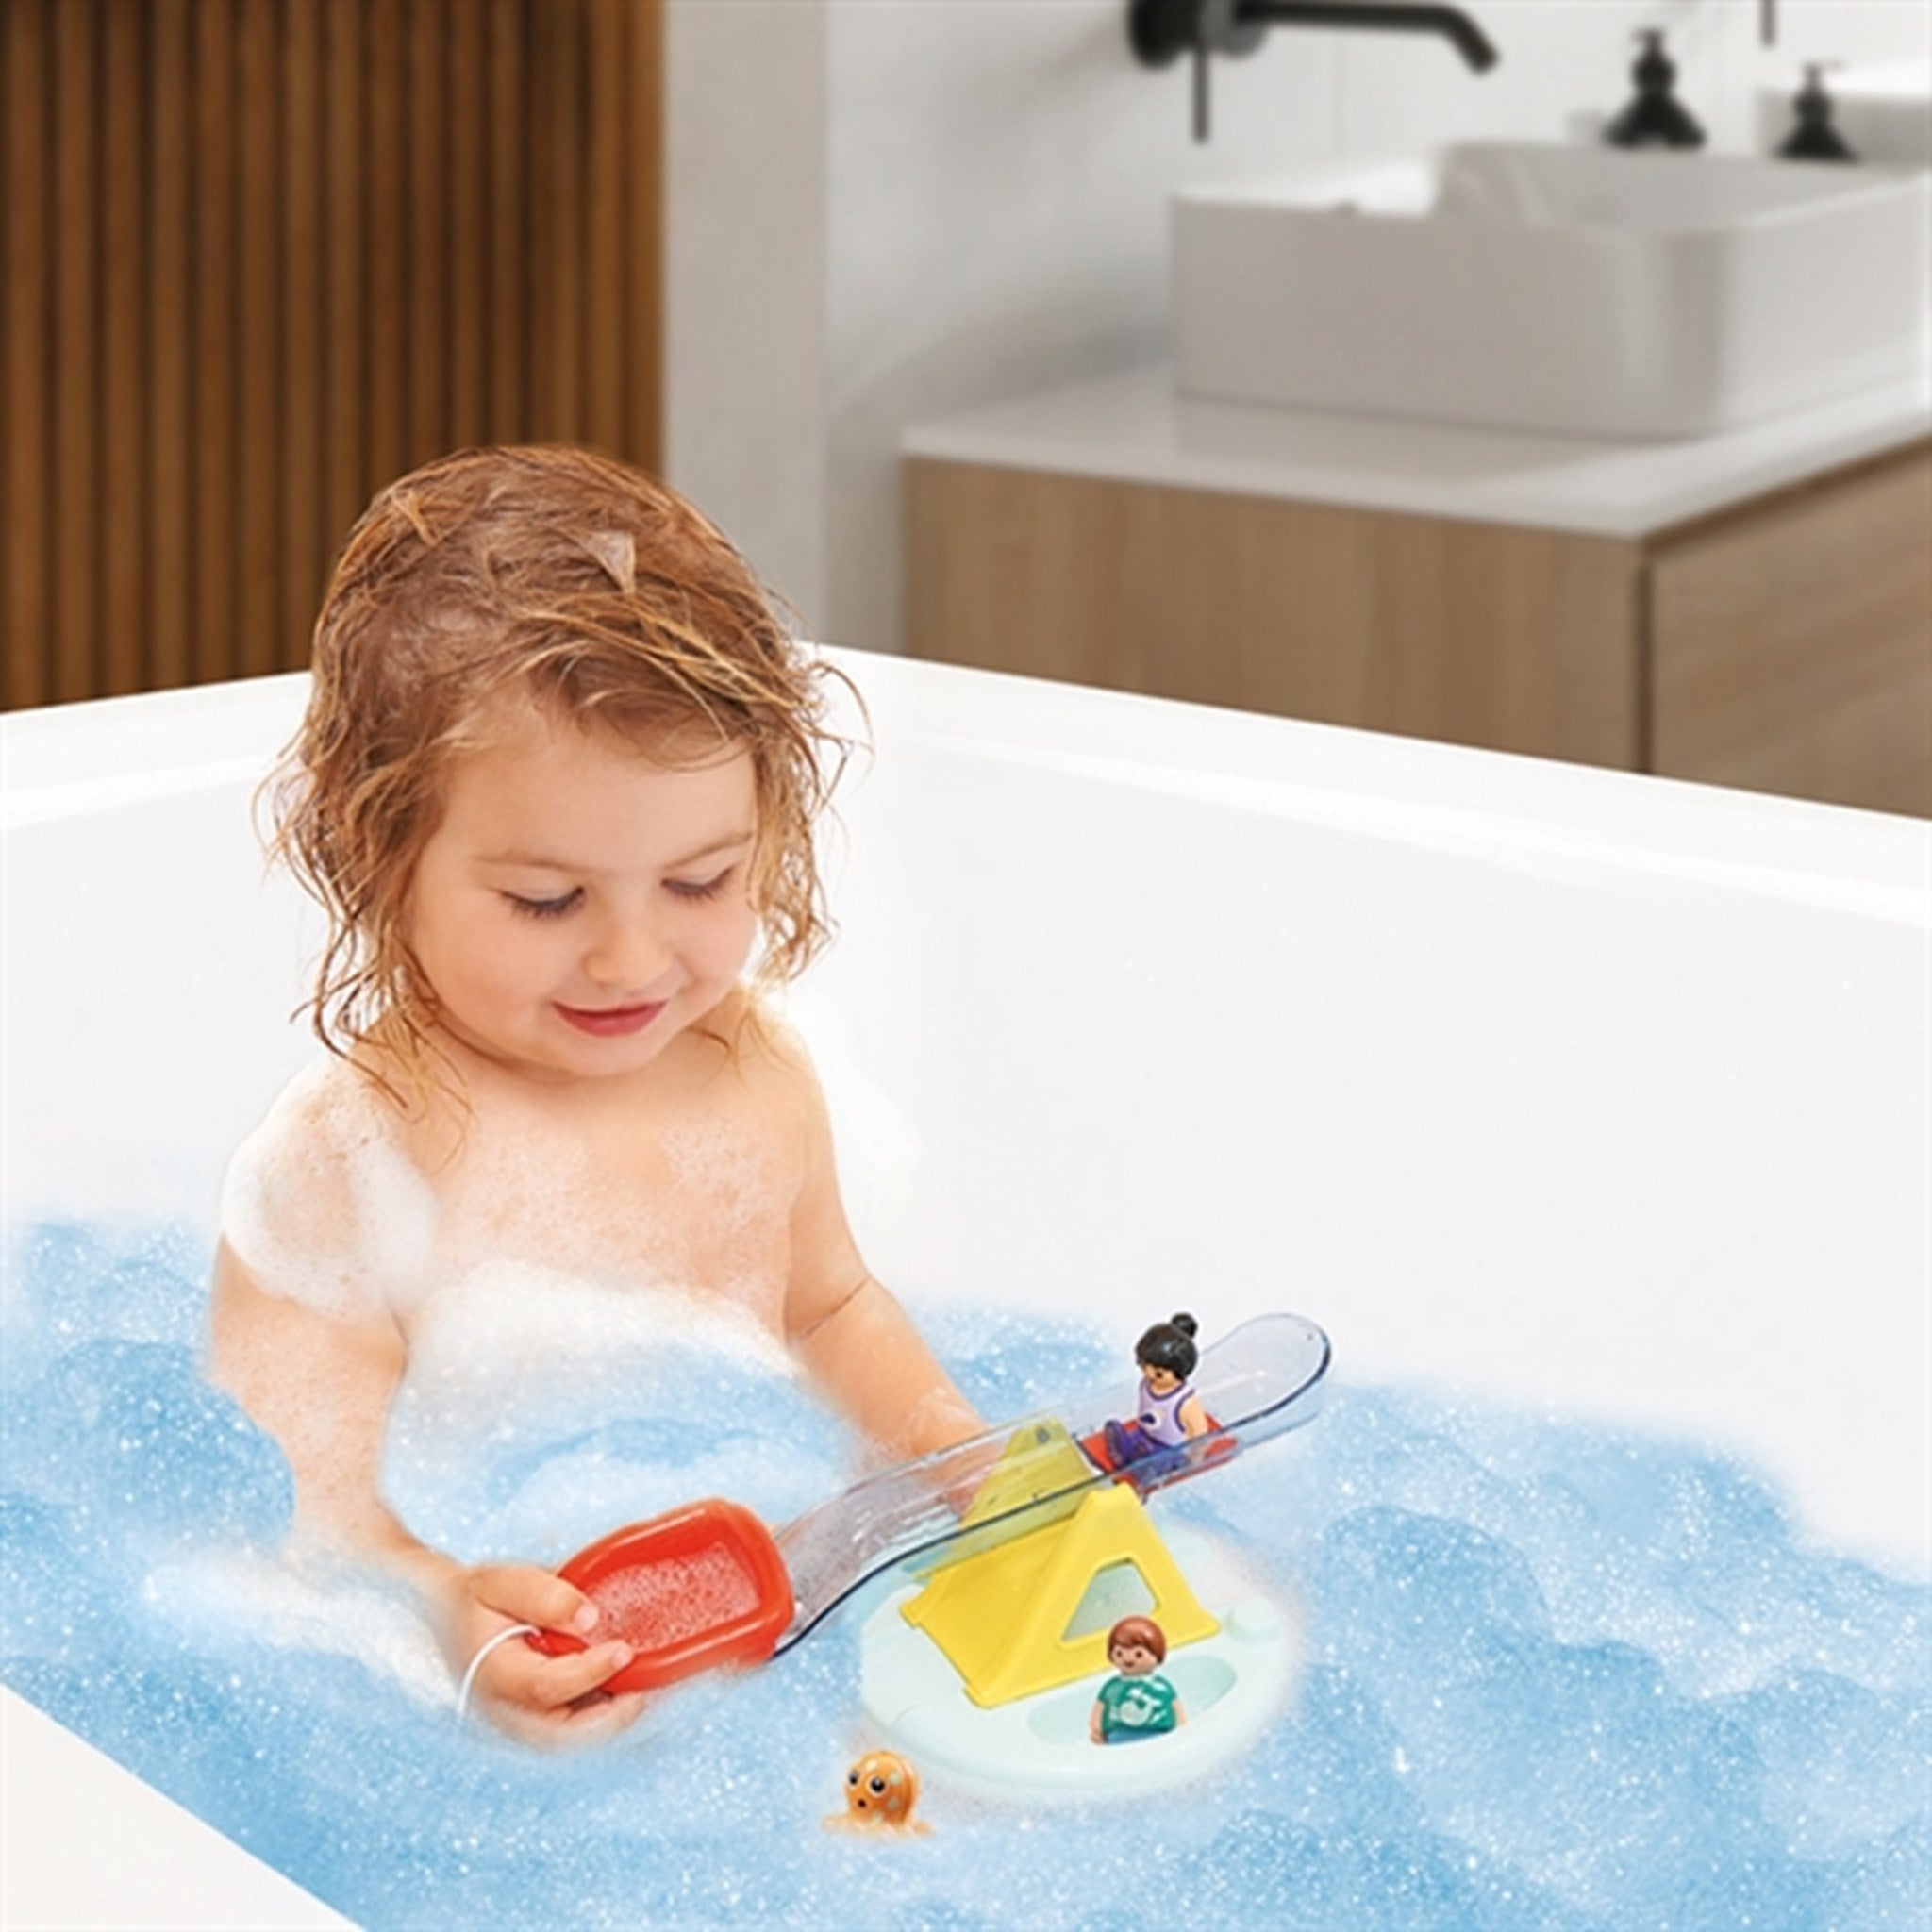 Playmobil® 1.2.3 Aqua - Water Seesaw with Boat 3